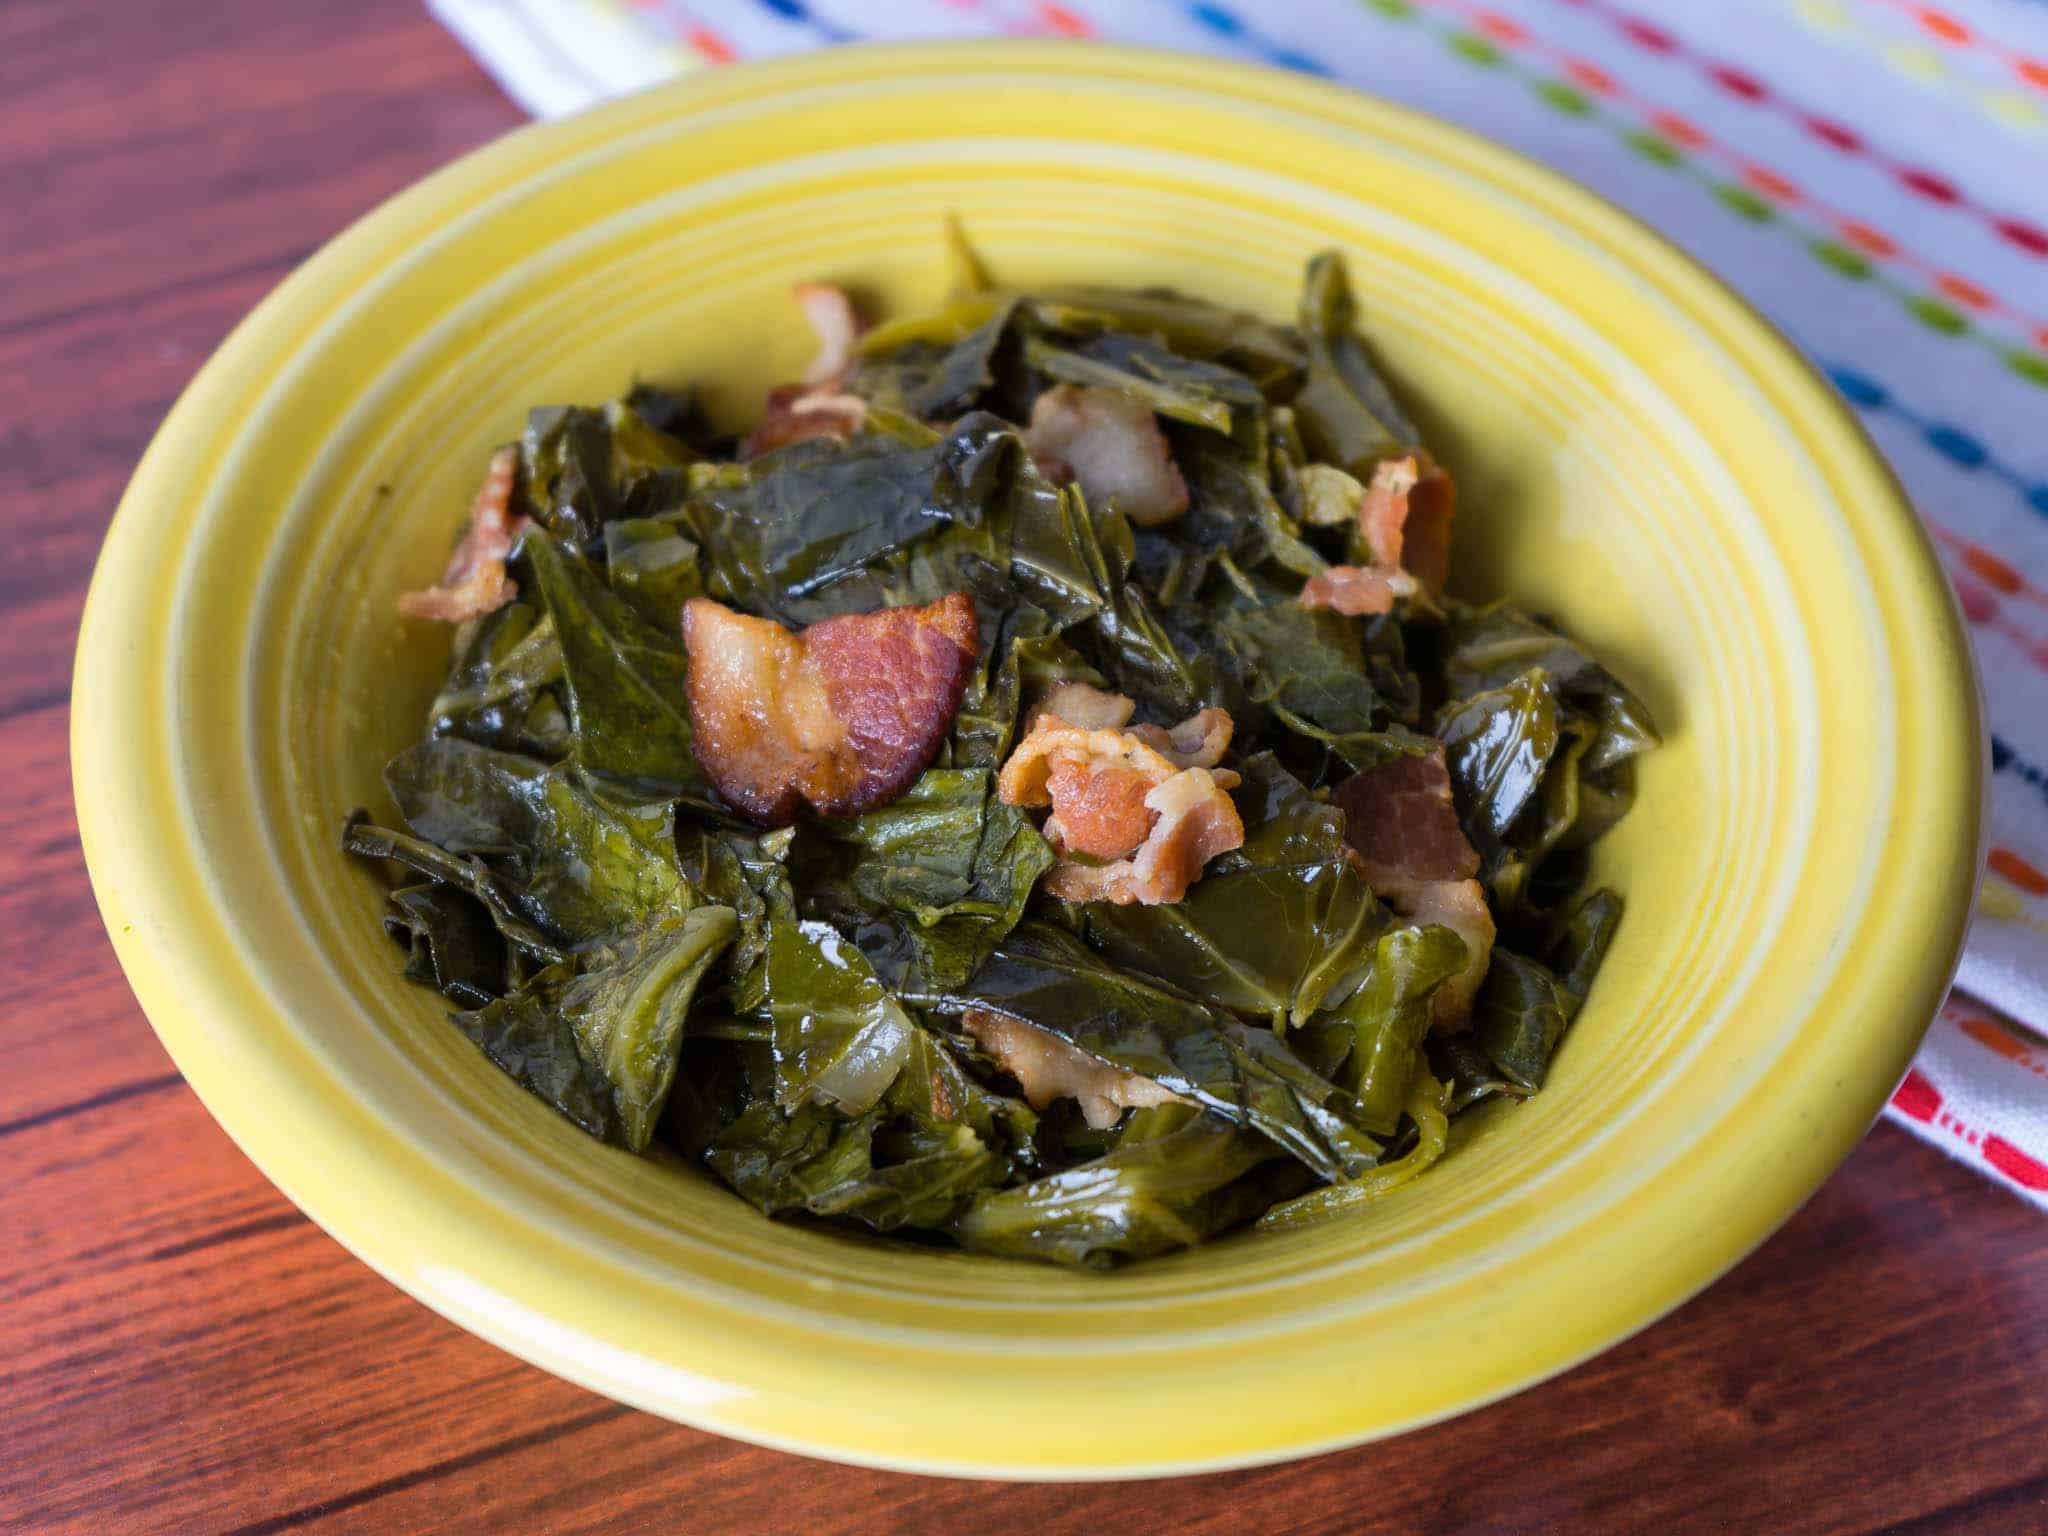 A bowl of collard greens and bacon